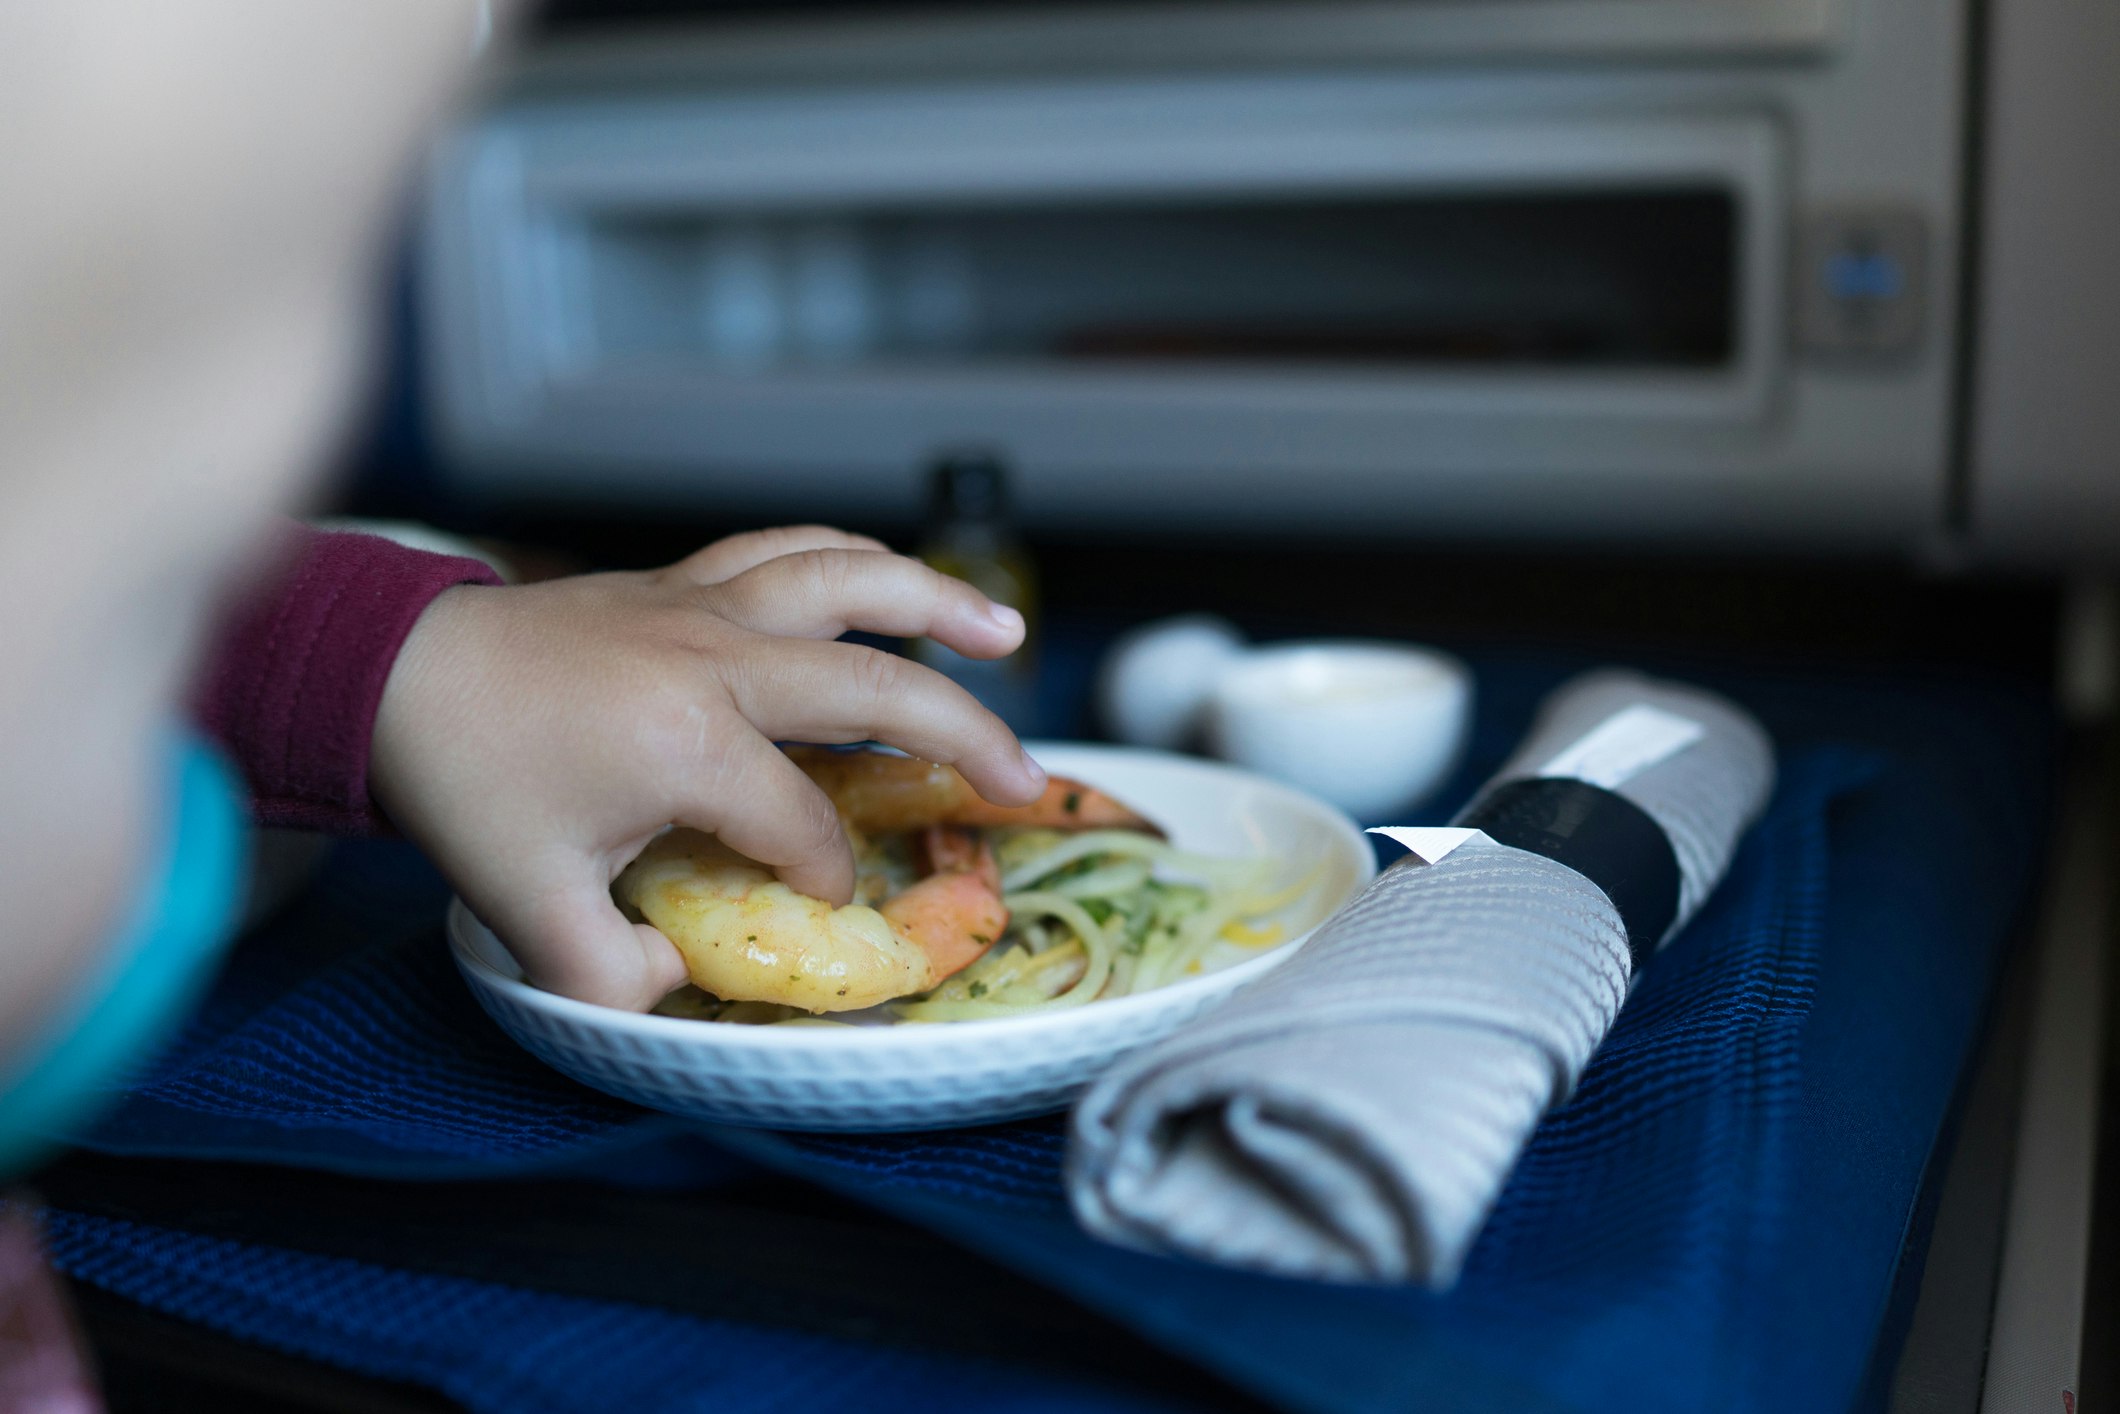 A child eats a shrimp from a airplane tray. 